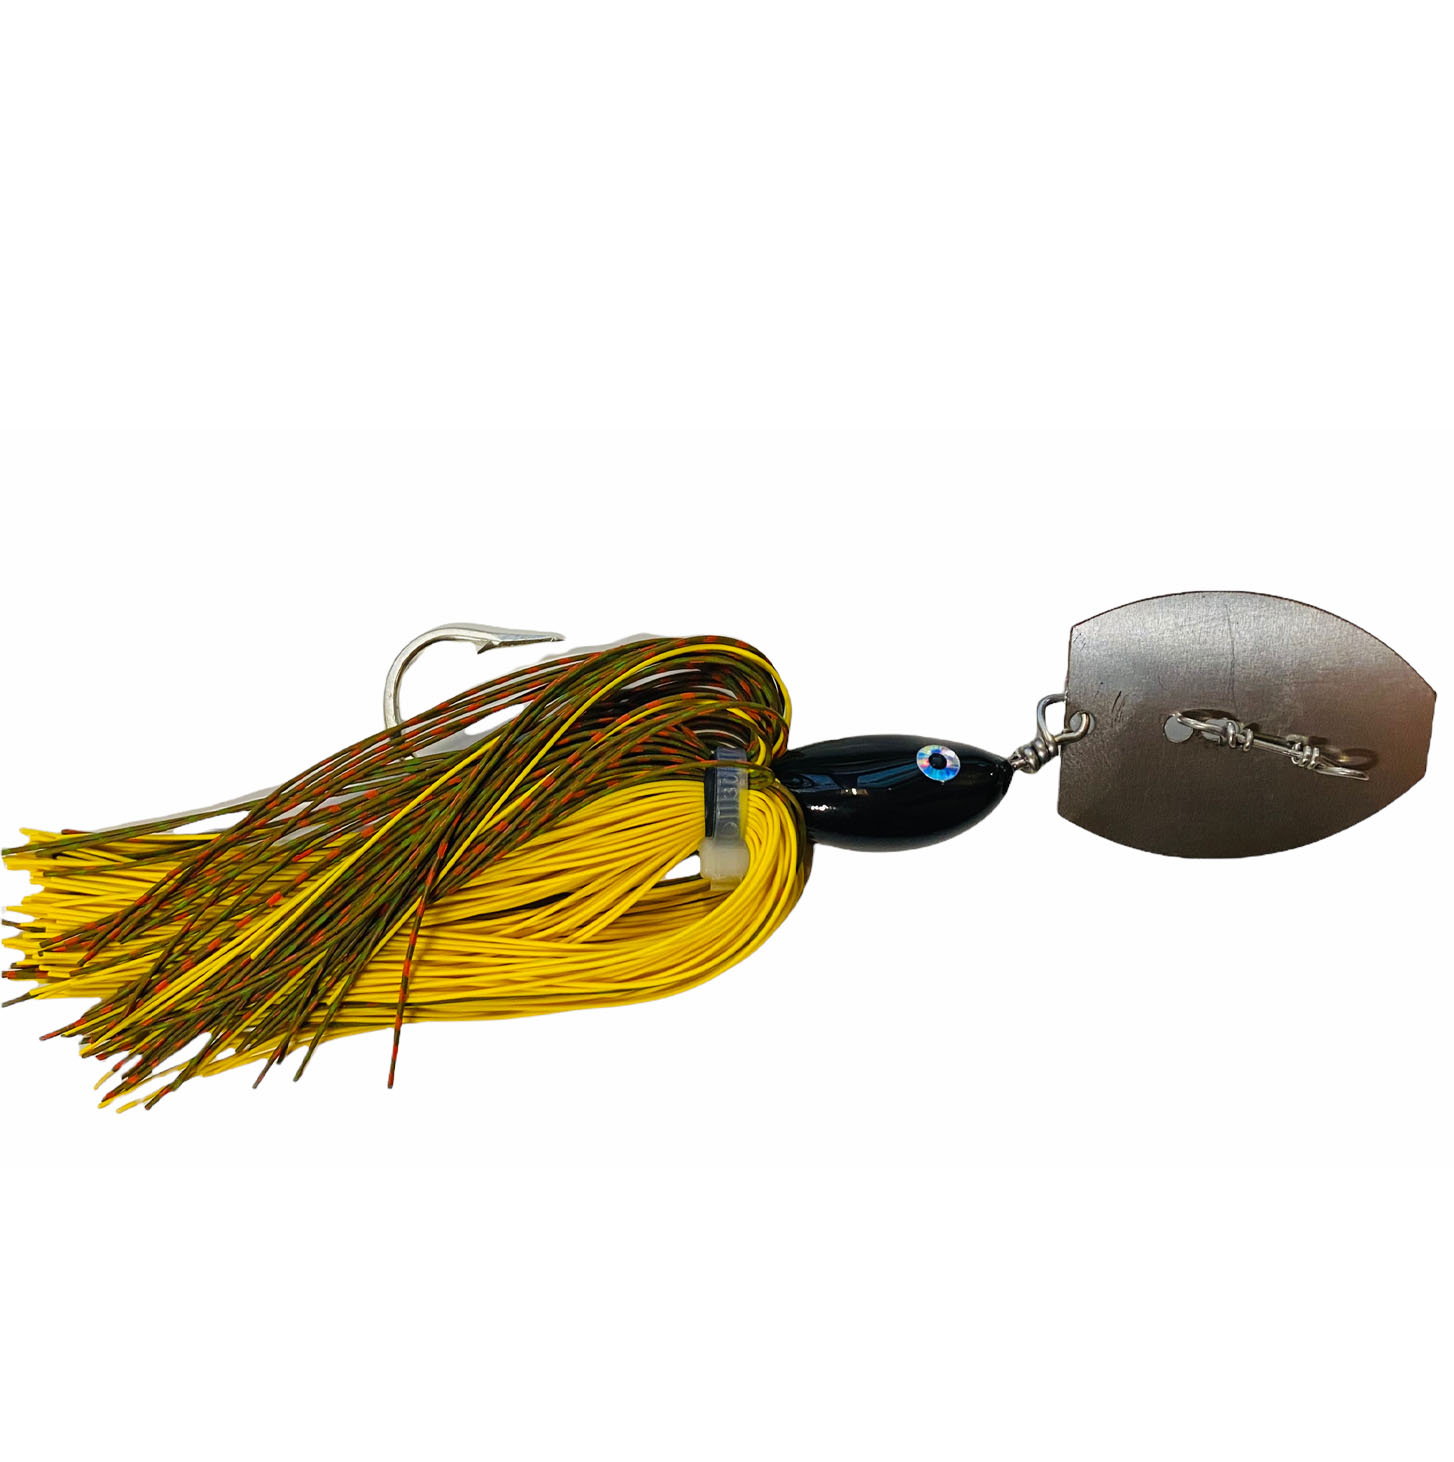 Chatterbait Made in Home 17cm 45gr Yellow/Brown